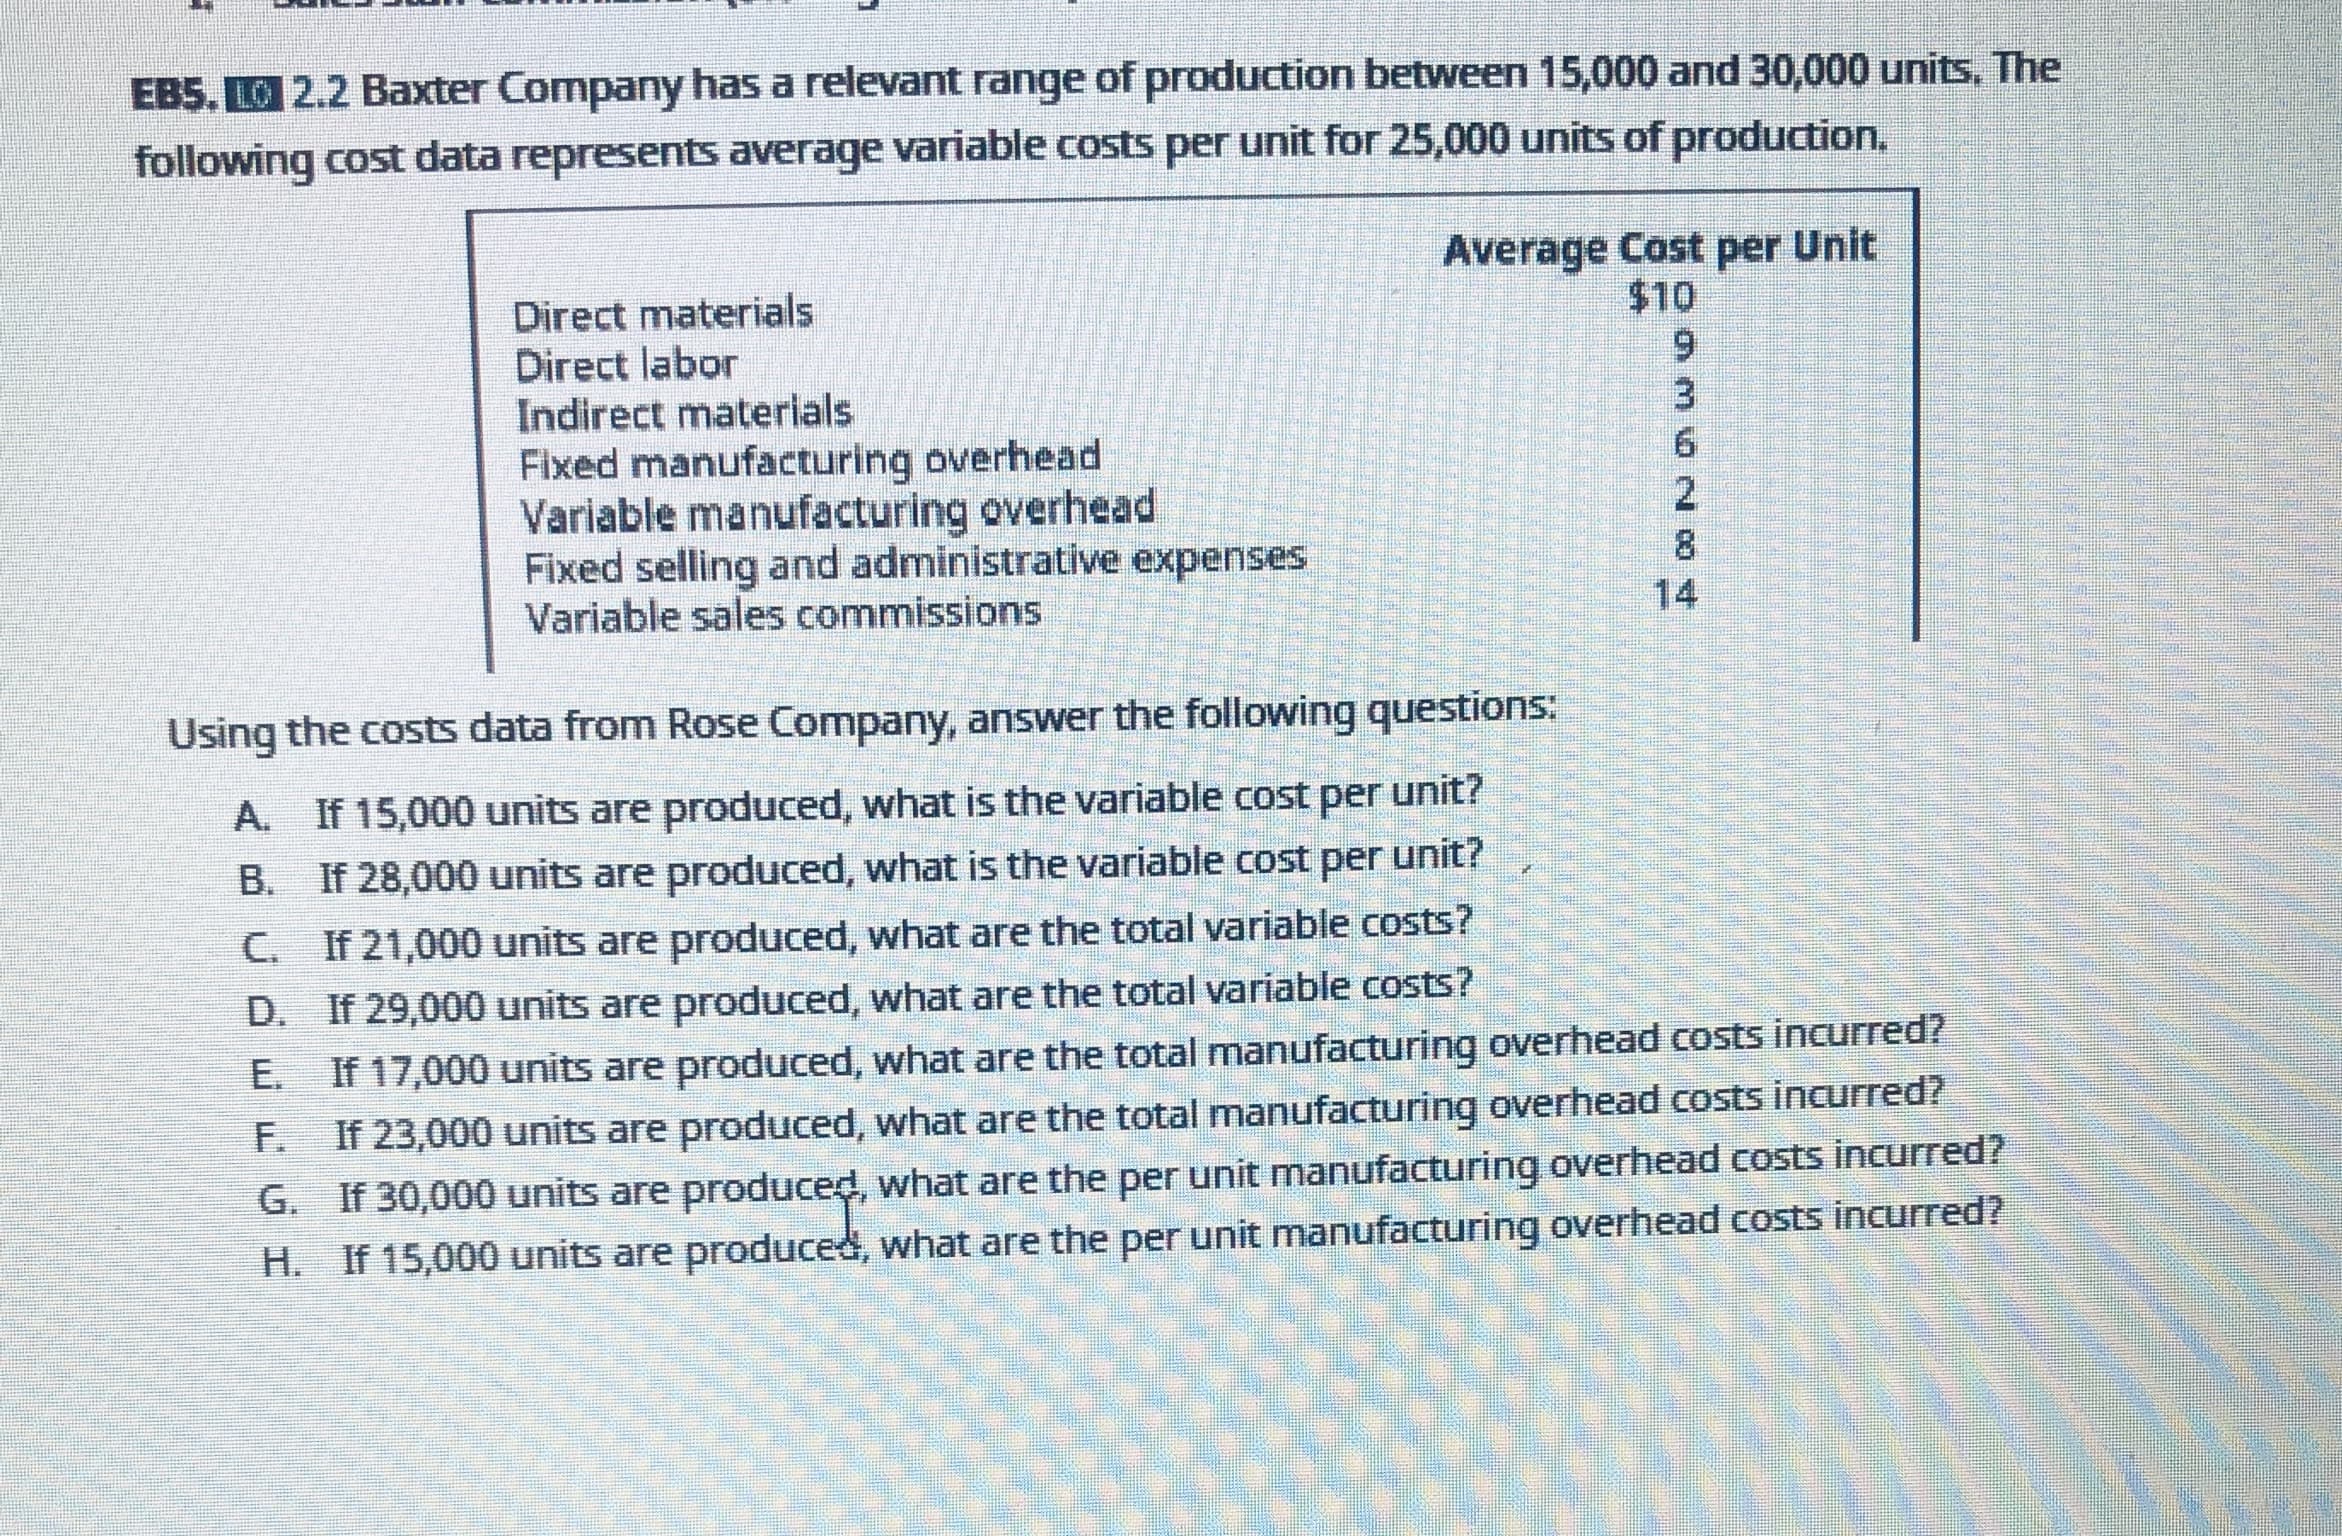 Using the costs data from Rose Company, answer the following questions:
A. If 15,000 units are produced, what is the variable cost per unit?
B. If 28,000 units are produced, what is the variable cost per unit?
C. If 21,000 units are produced, what are the total variable costs?
